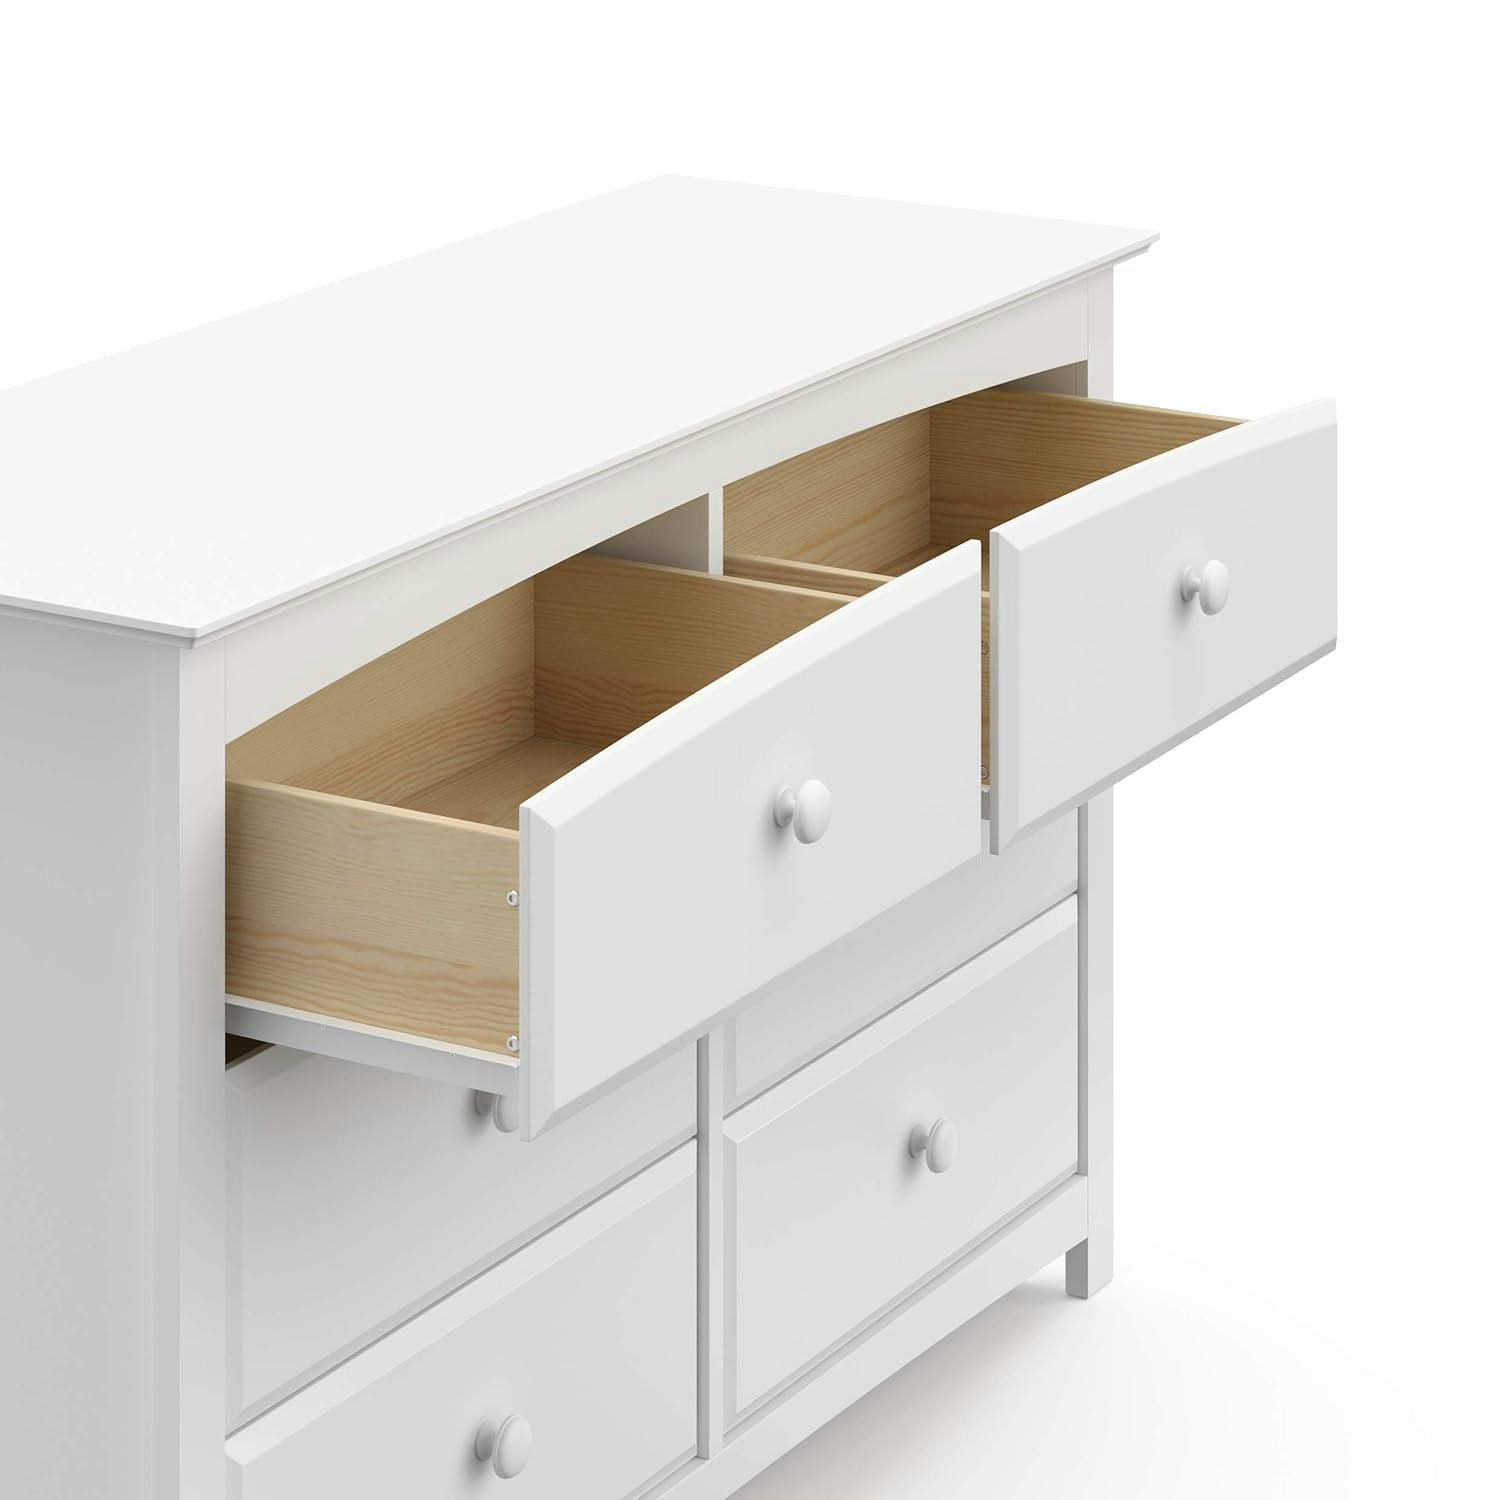 Kenton Classic White 6-Drawer Nursery Dresser with Safety Stops